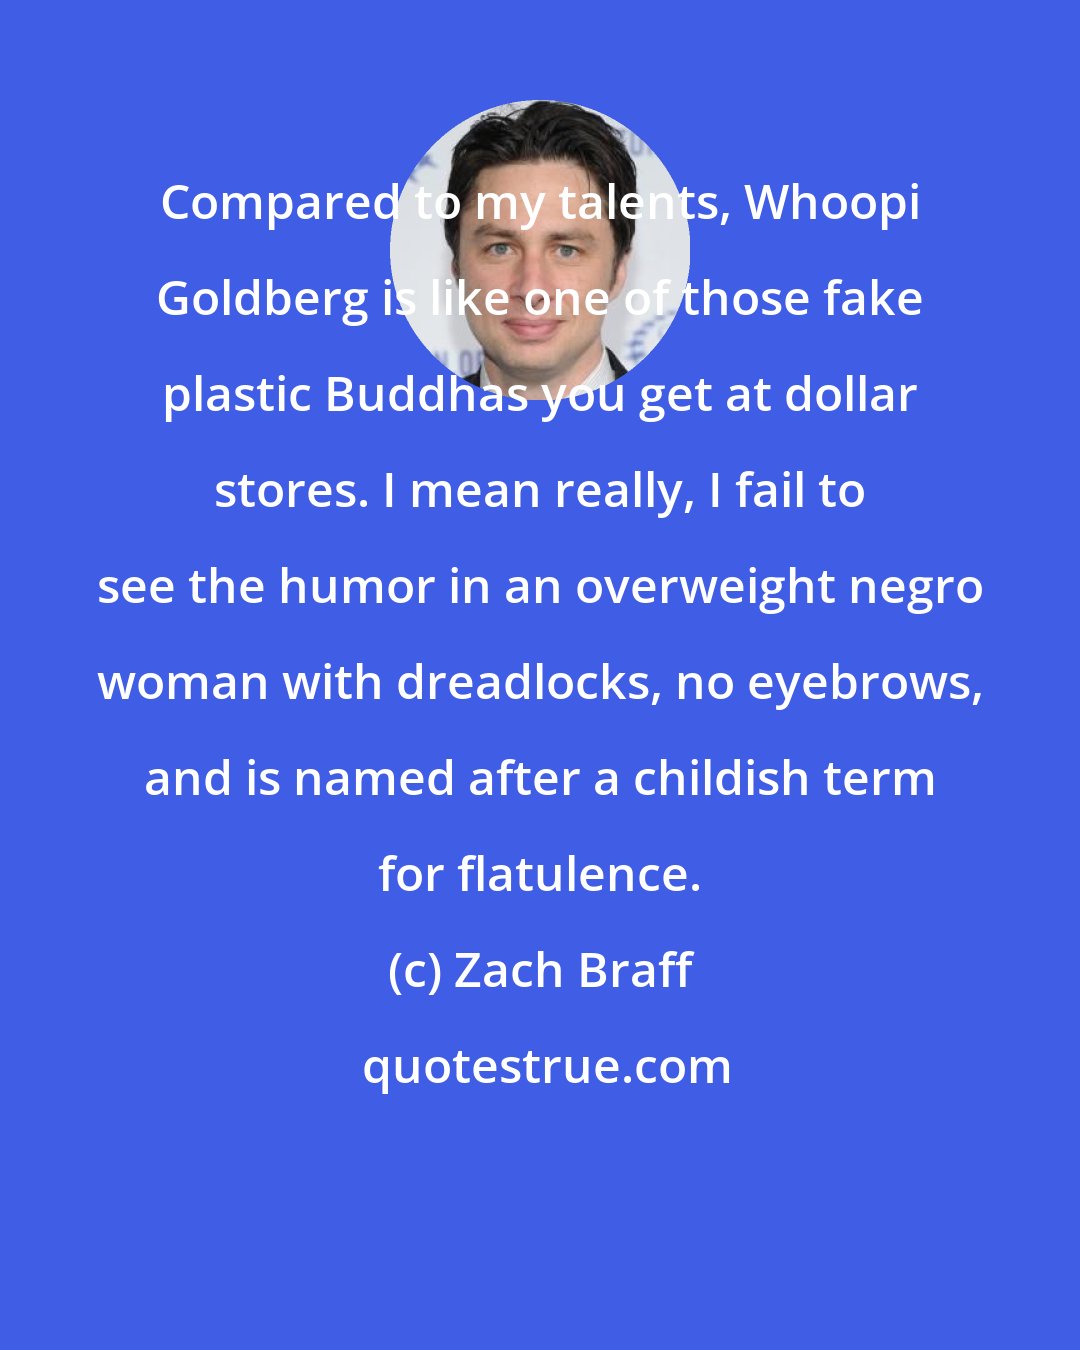 Zach Braff: Compared to my talents, Whoopi Goldberg is like one of those fake plastic Buddhas you get at dollar stores. I mean really, I fail to see the humor in an overweight negro woman with dreadlocks, no eyebrows, and is named after a childish term for flatulence.